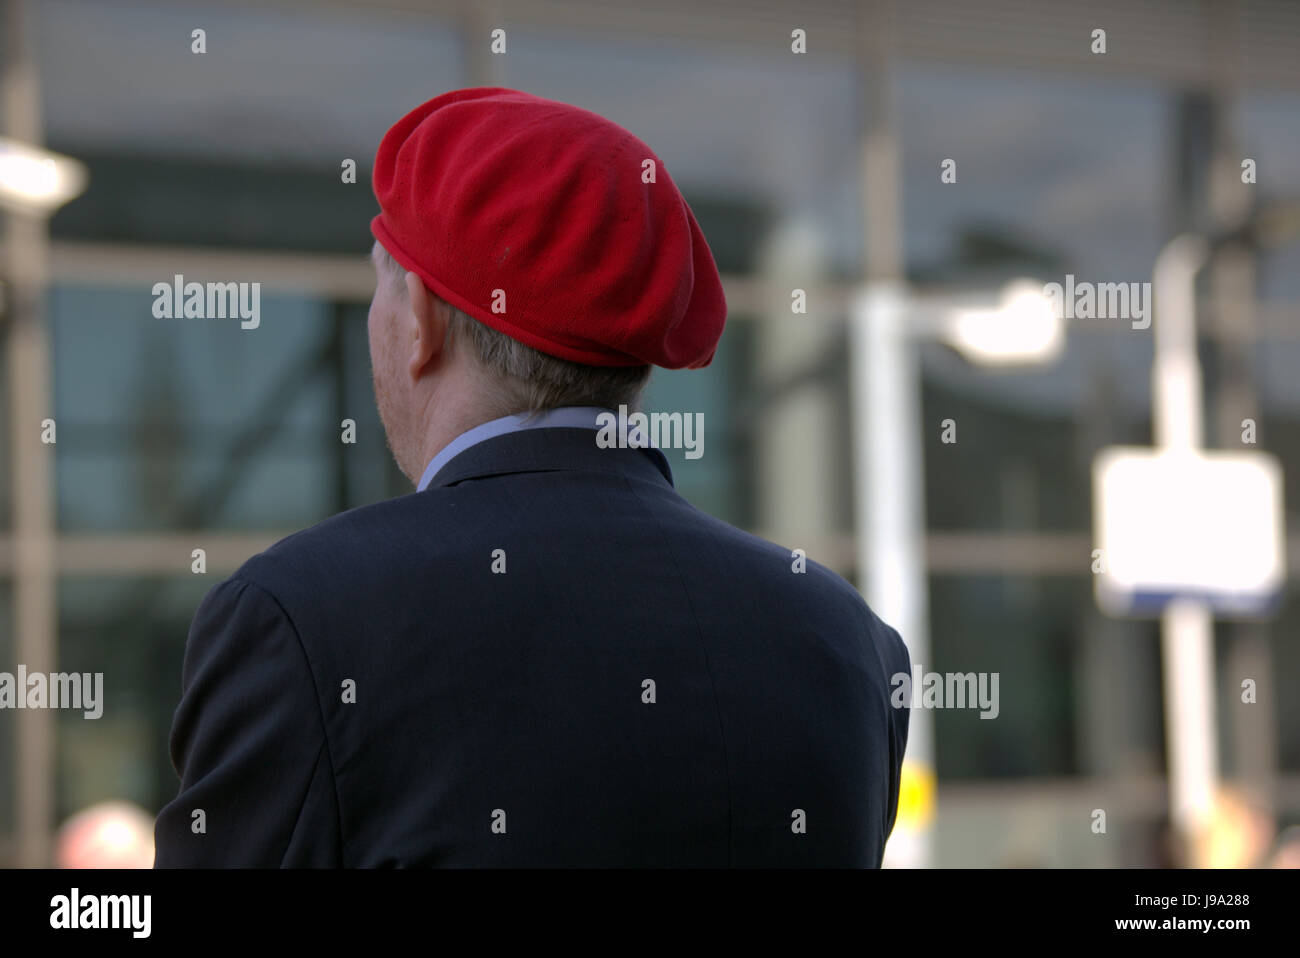 man in a train station in a red beret bokeh background out of focus Stock Photo